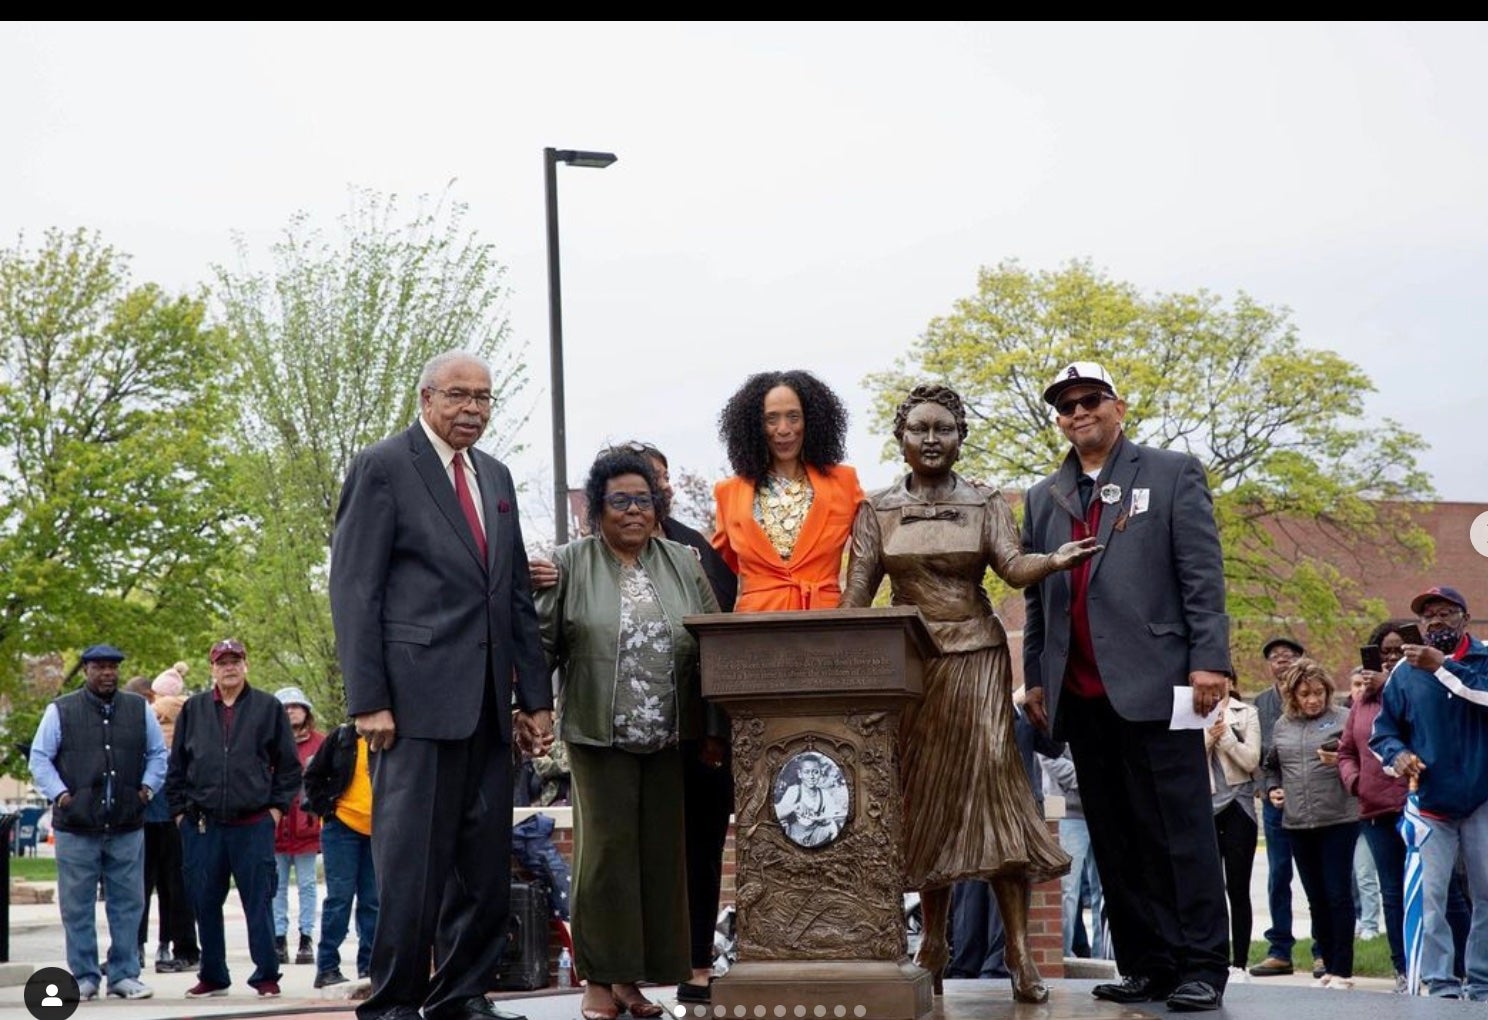 Statue Honoring Emmett Till's Mother– Civil Rights Icon Mamie Till-Mobley– Unveiled At Illinois High School She Attended